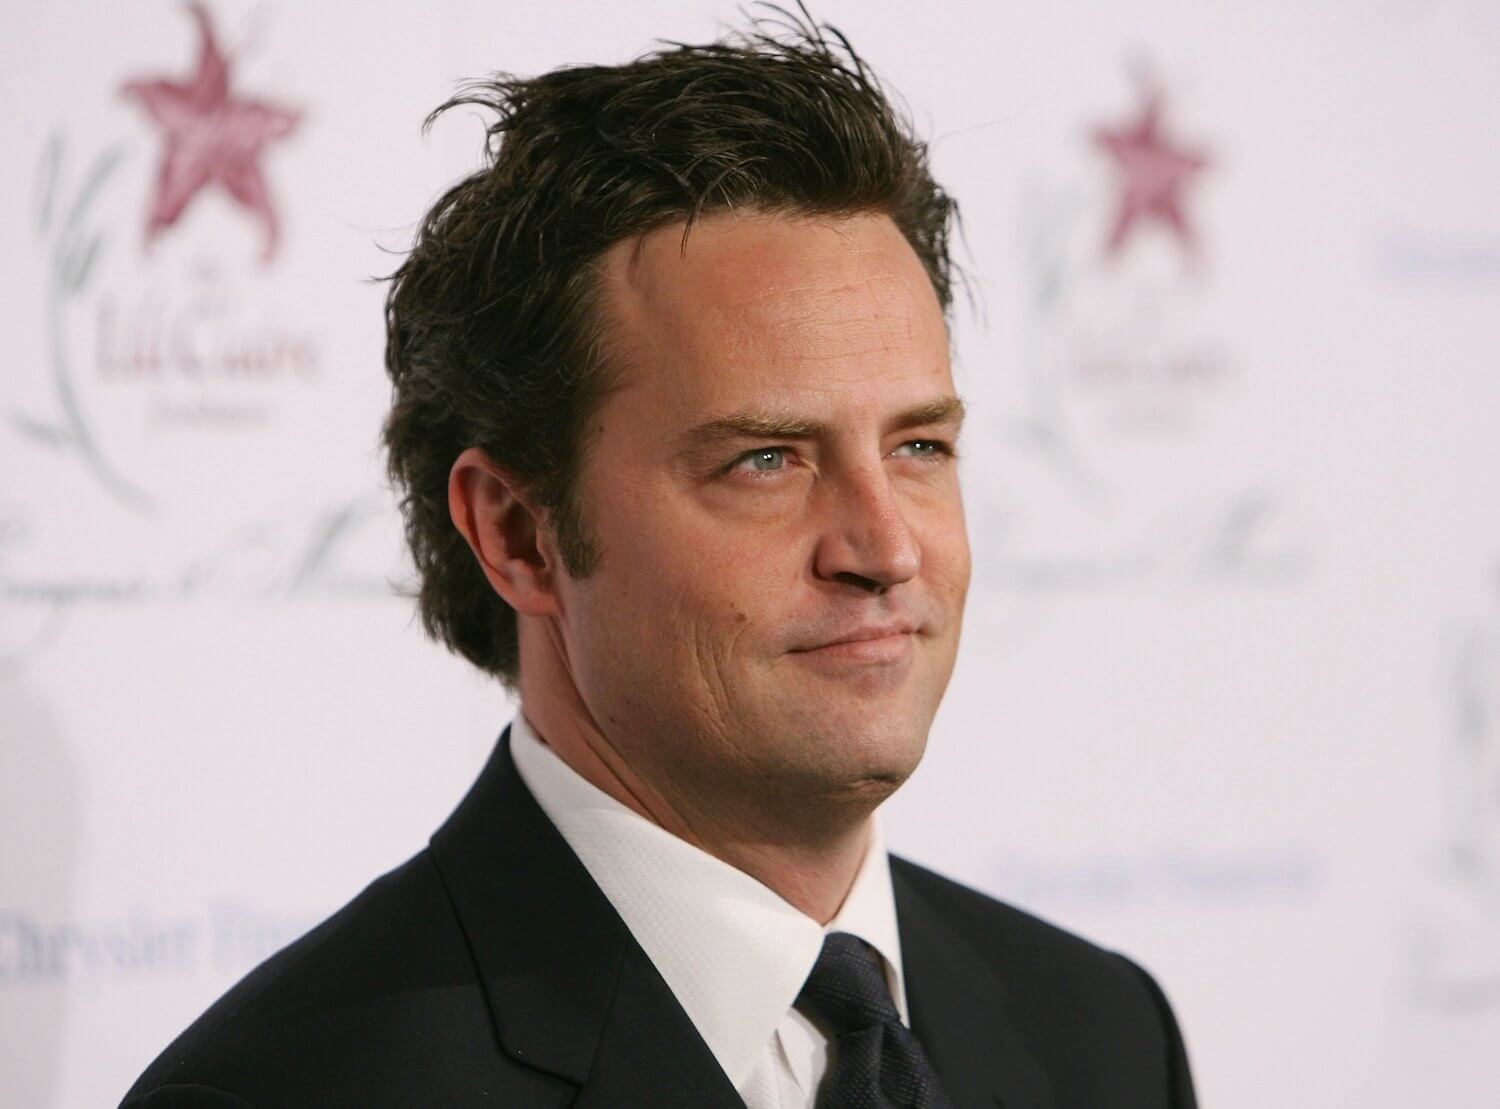 'Friends' star Matthew Perry dressed in a suit